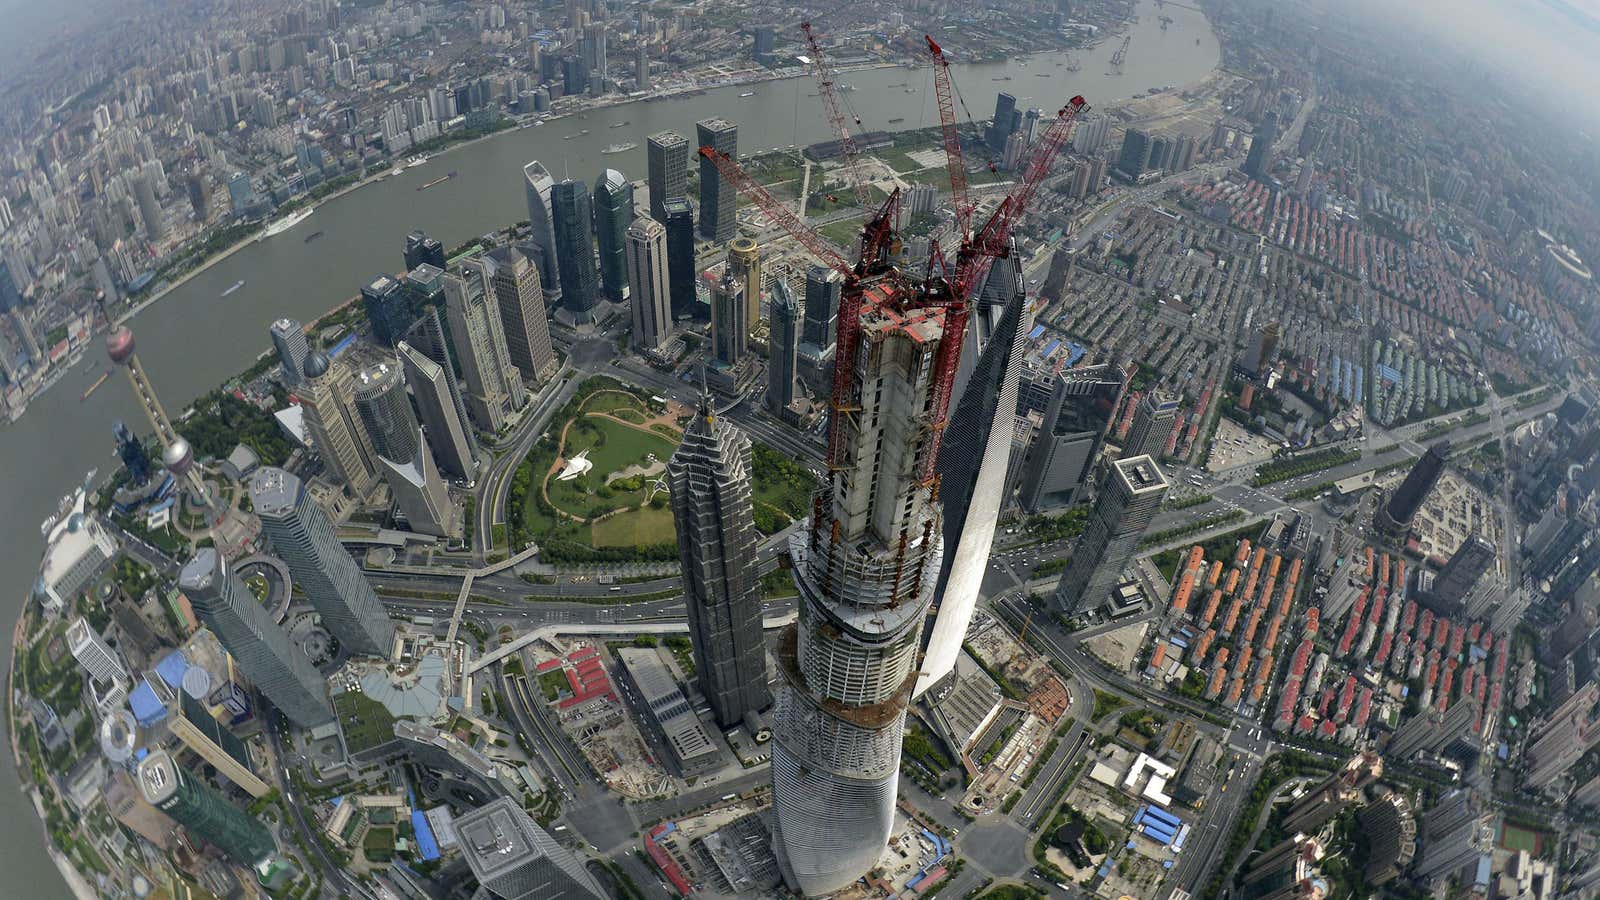 Shanghai Tower in Pudong district, Shanghai.